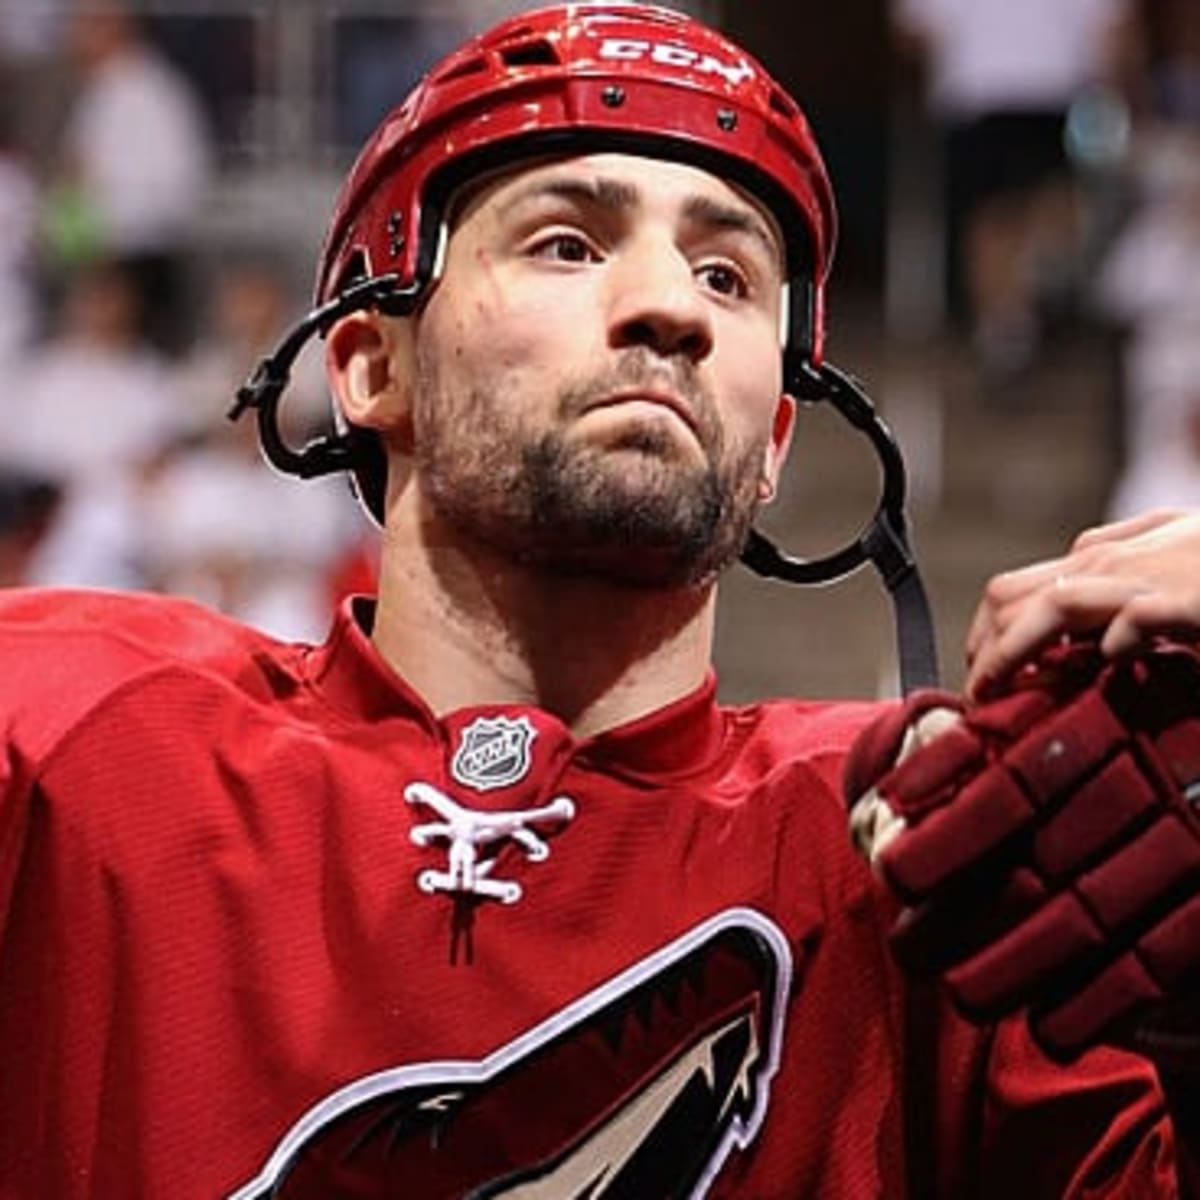 Rangers might not be 'frauds' after all, Paul Bissonnette says